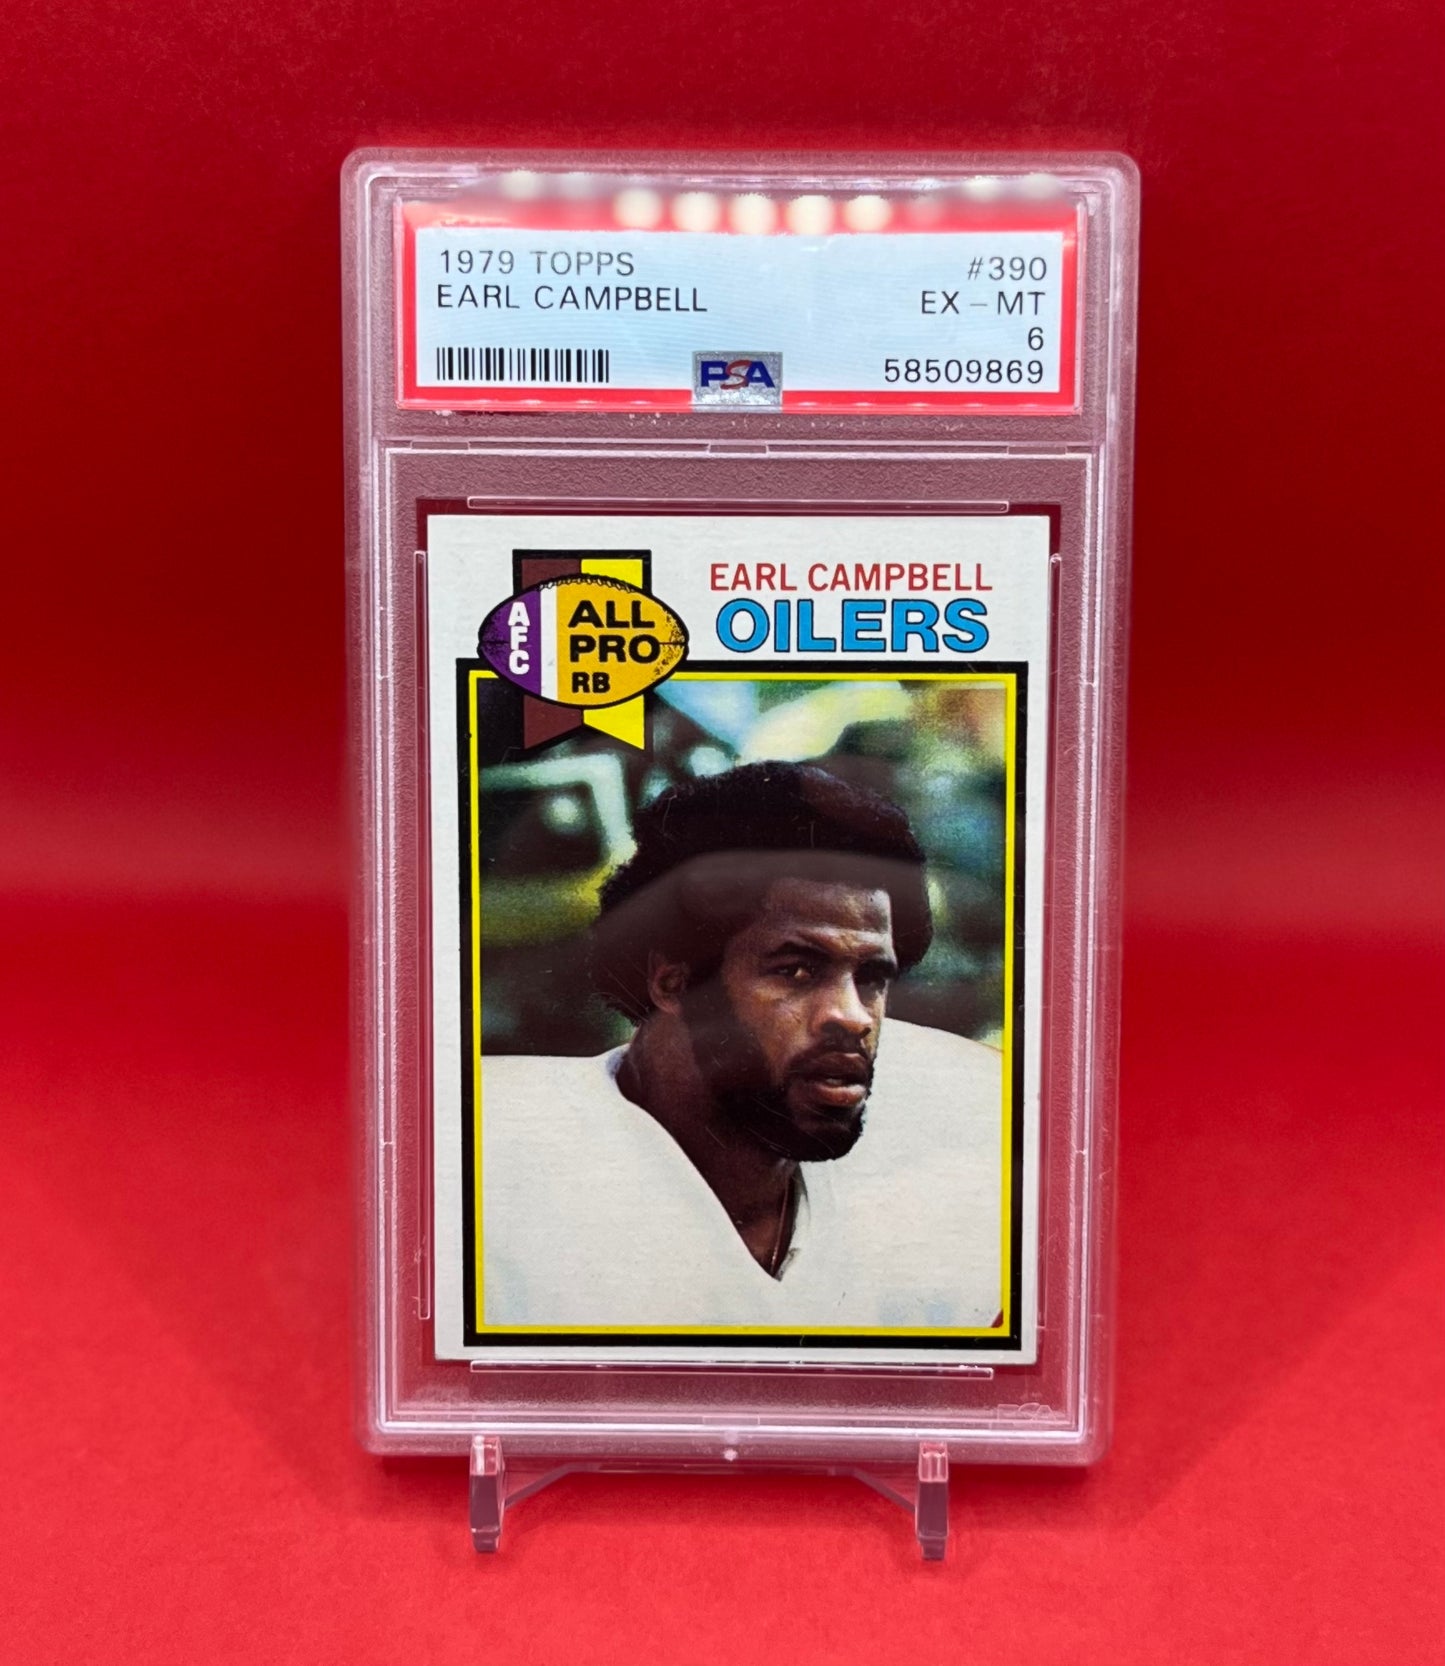 1979 #390 EARL CAMPBELL TOPPS - PSA 6 EX-MT